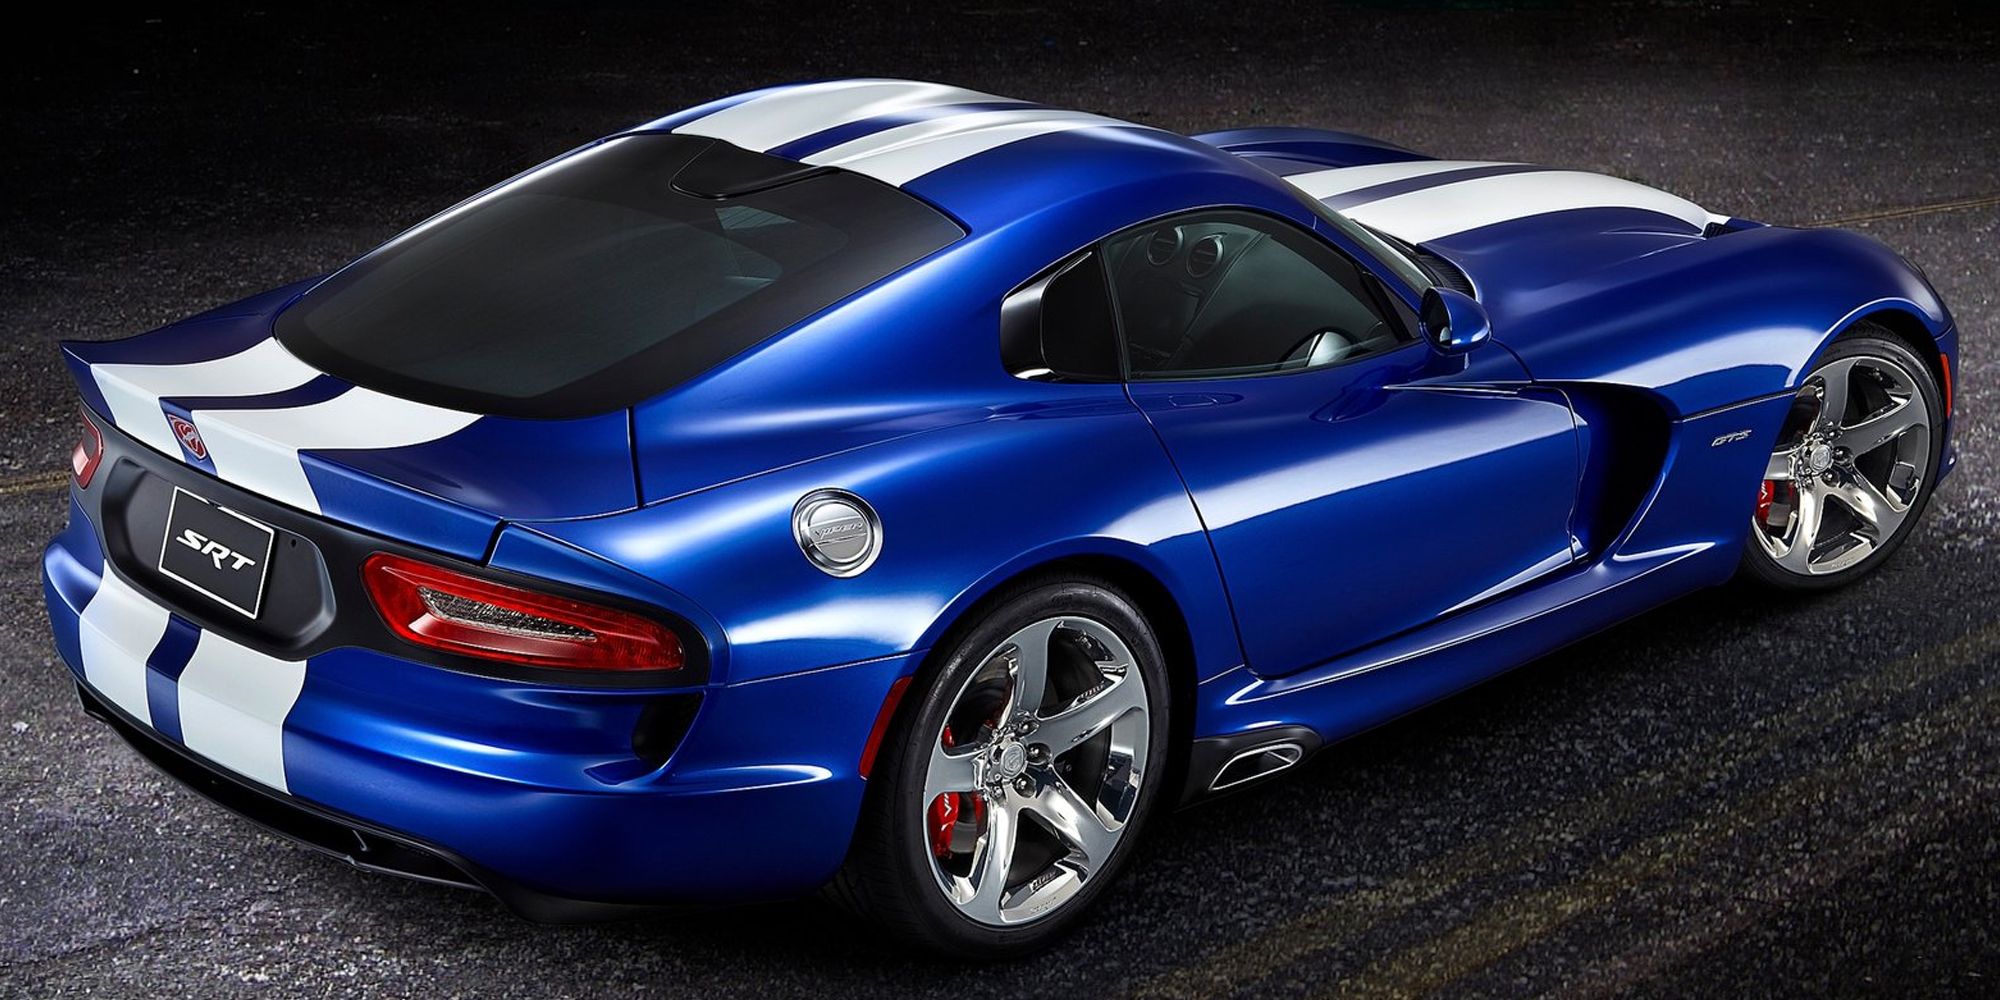 Rear 3/4 view of a blue Viper GTS with white stripes